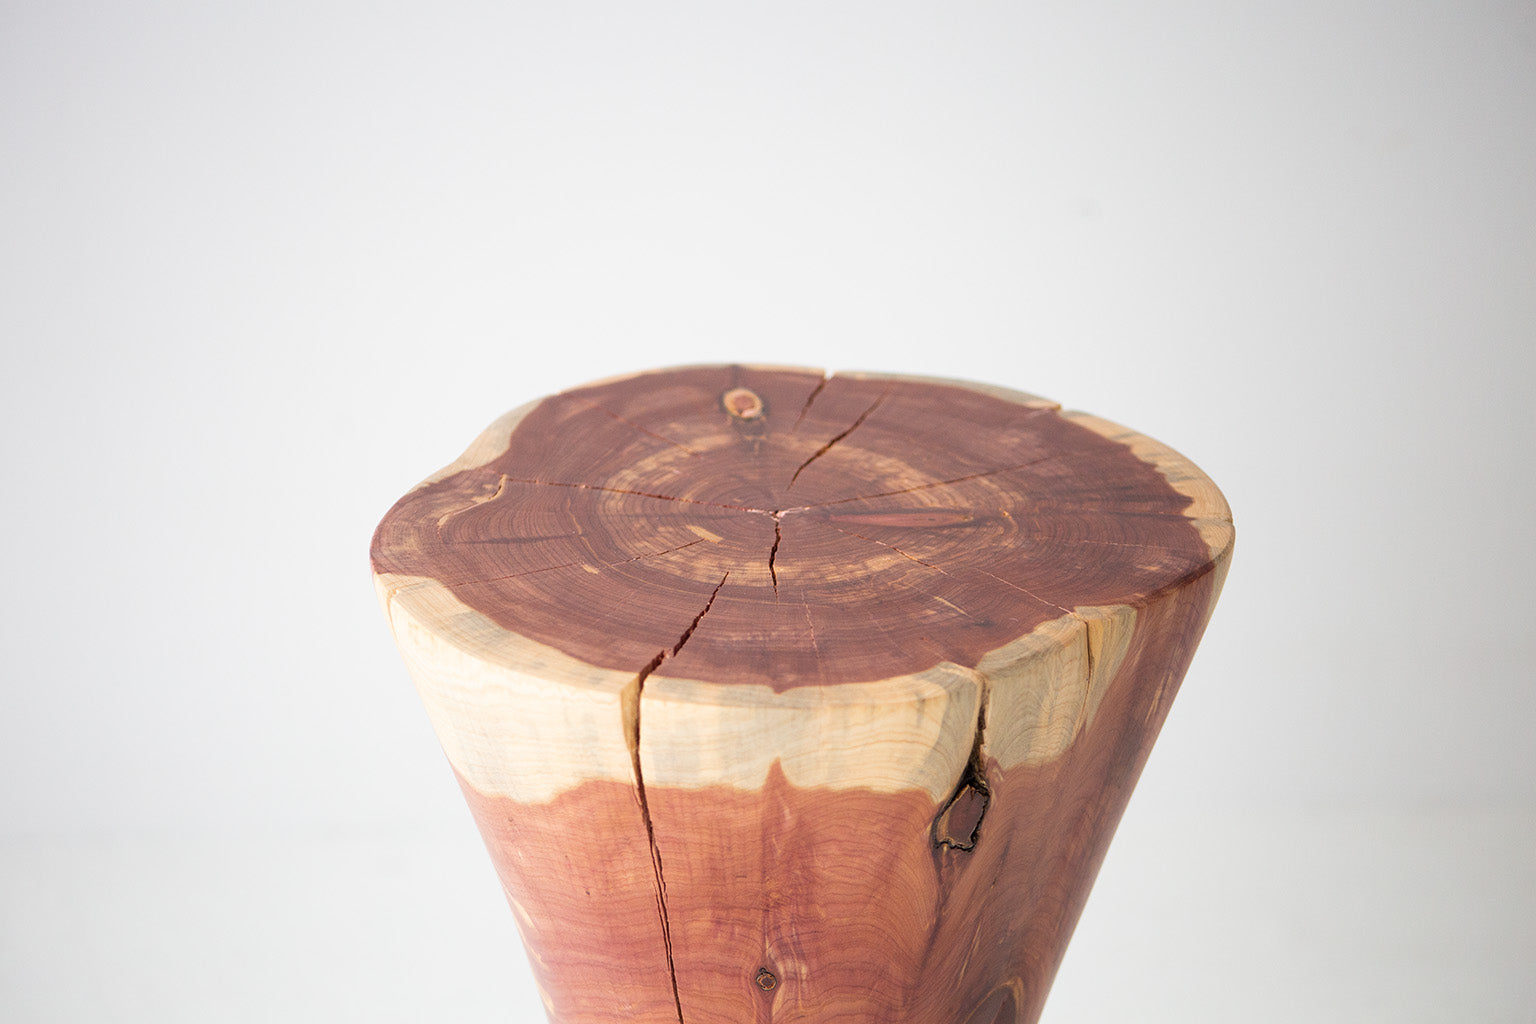 Sculpted Stump Table - The Hourglass - 1222